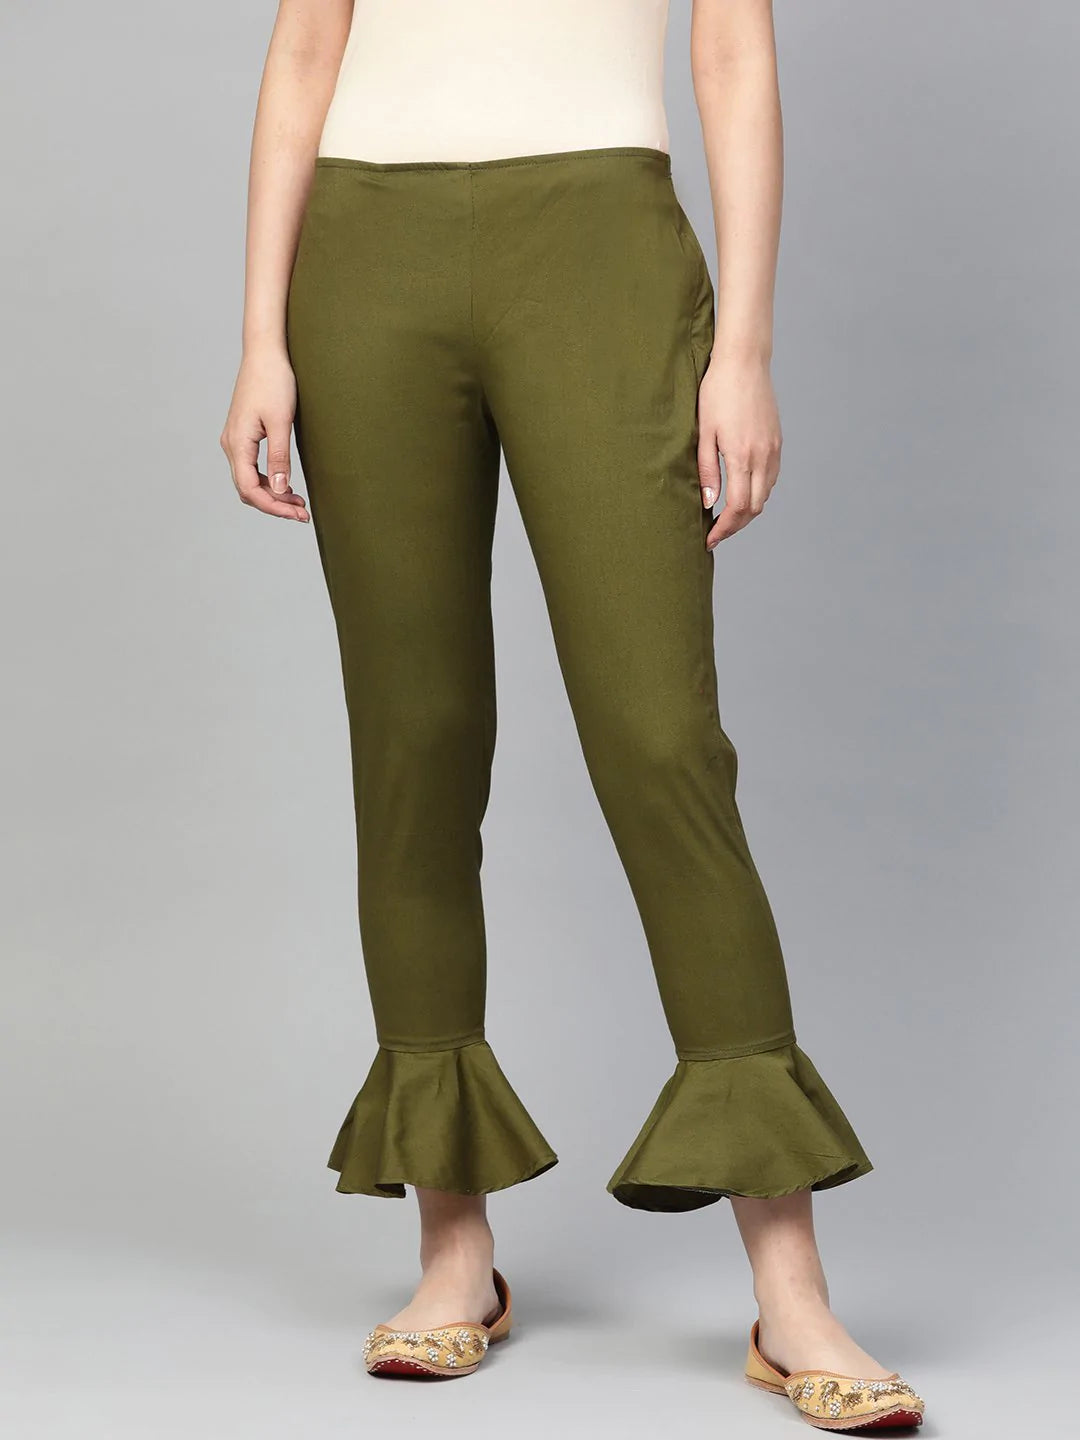 Jompers Women Olive Green Smart Fit Solid Bottom Flared Trousers ( JOP 2128 Olive )